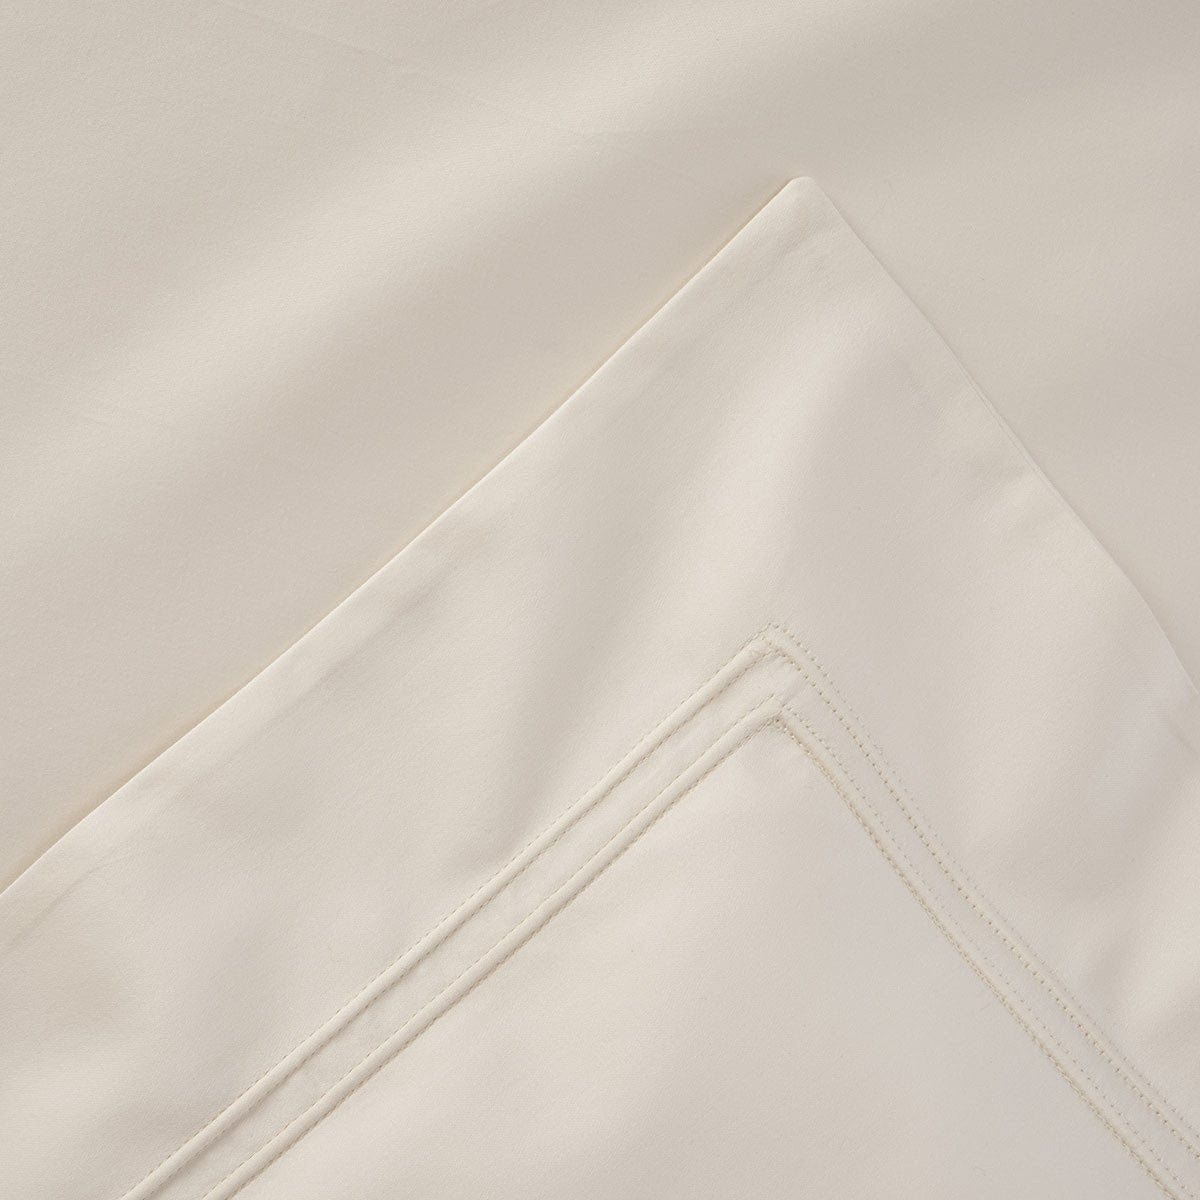 Duvet Covers Triomphe Duvet Cover by Yves Delorme Twin 68x86 / Nacre Yves Delorme